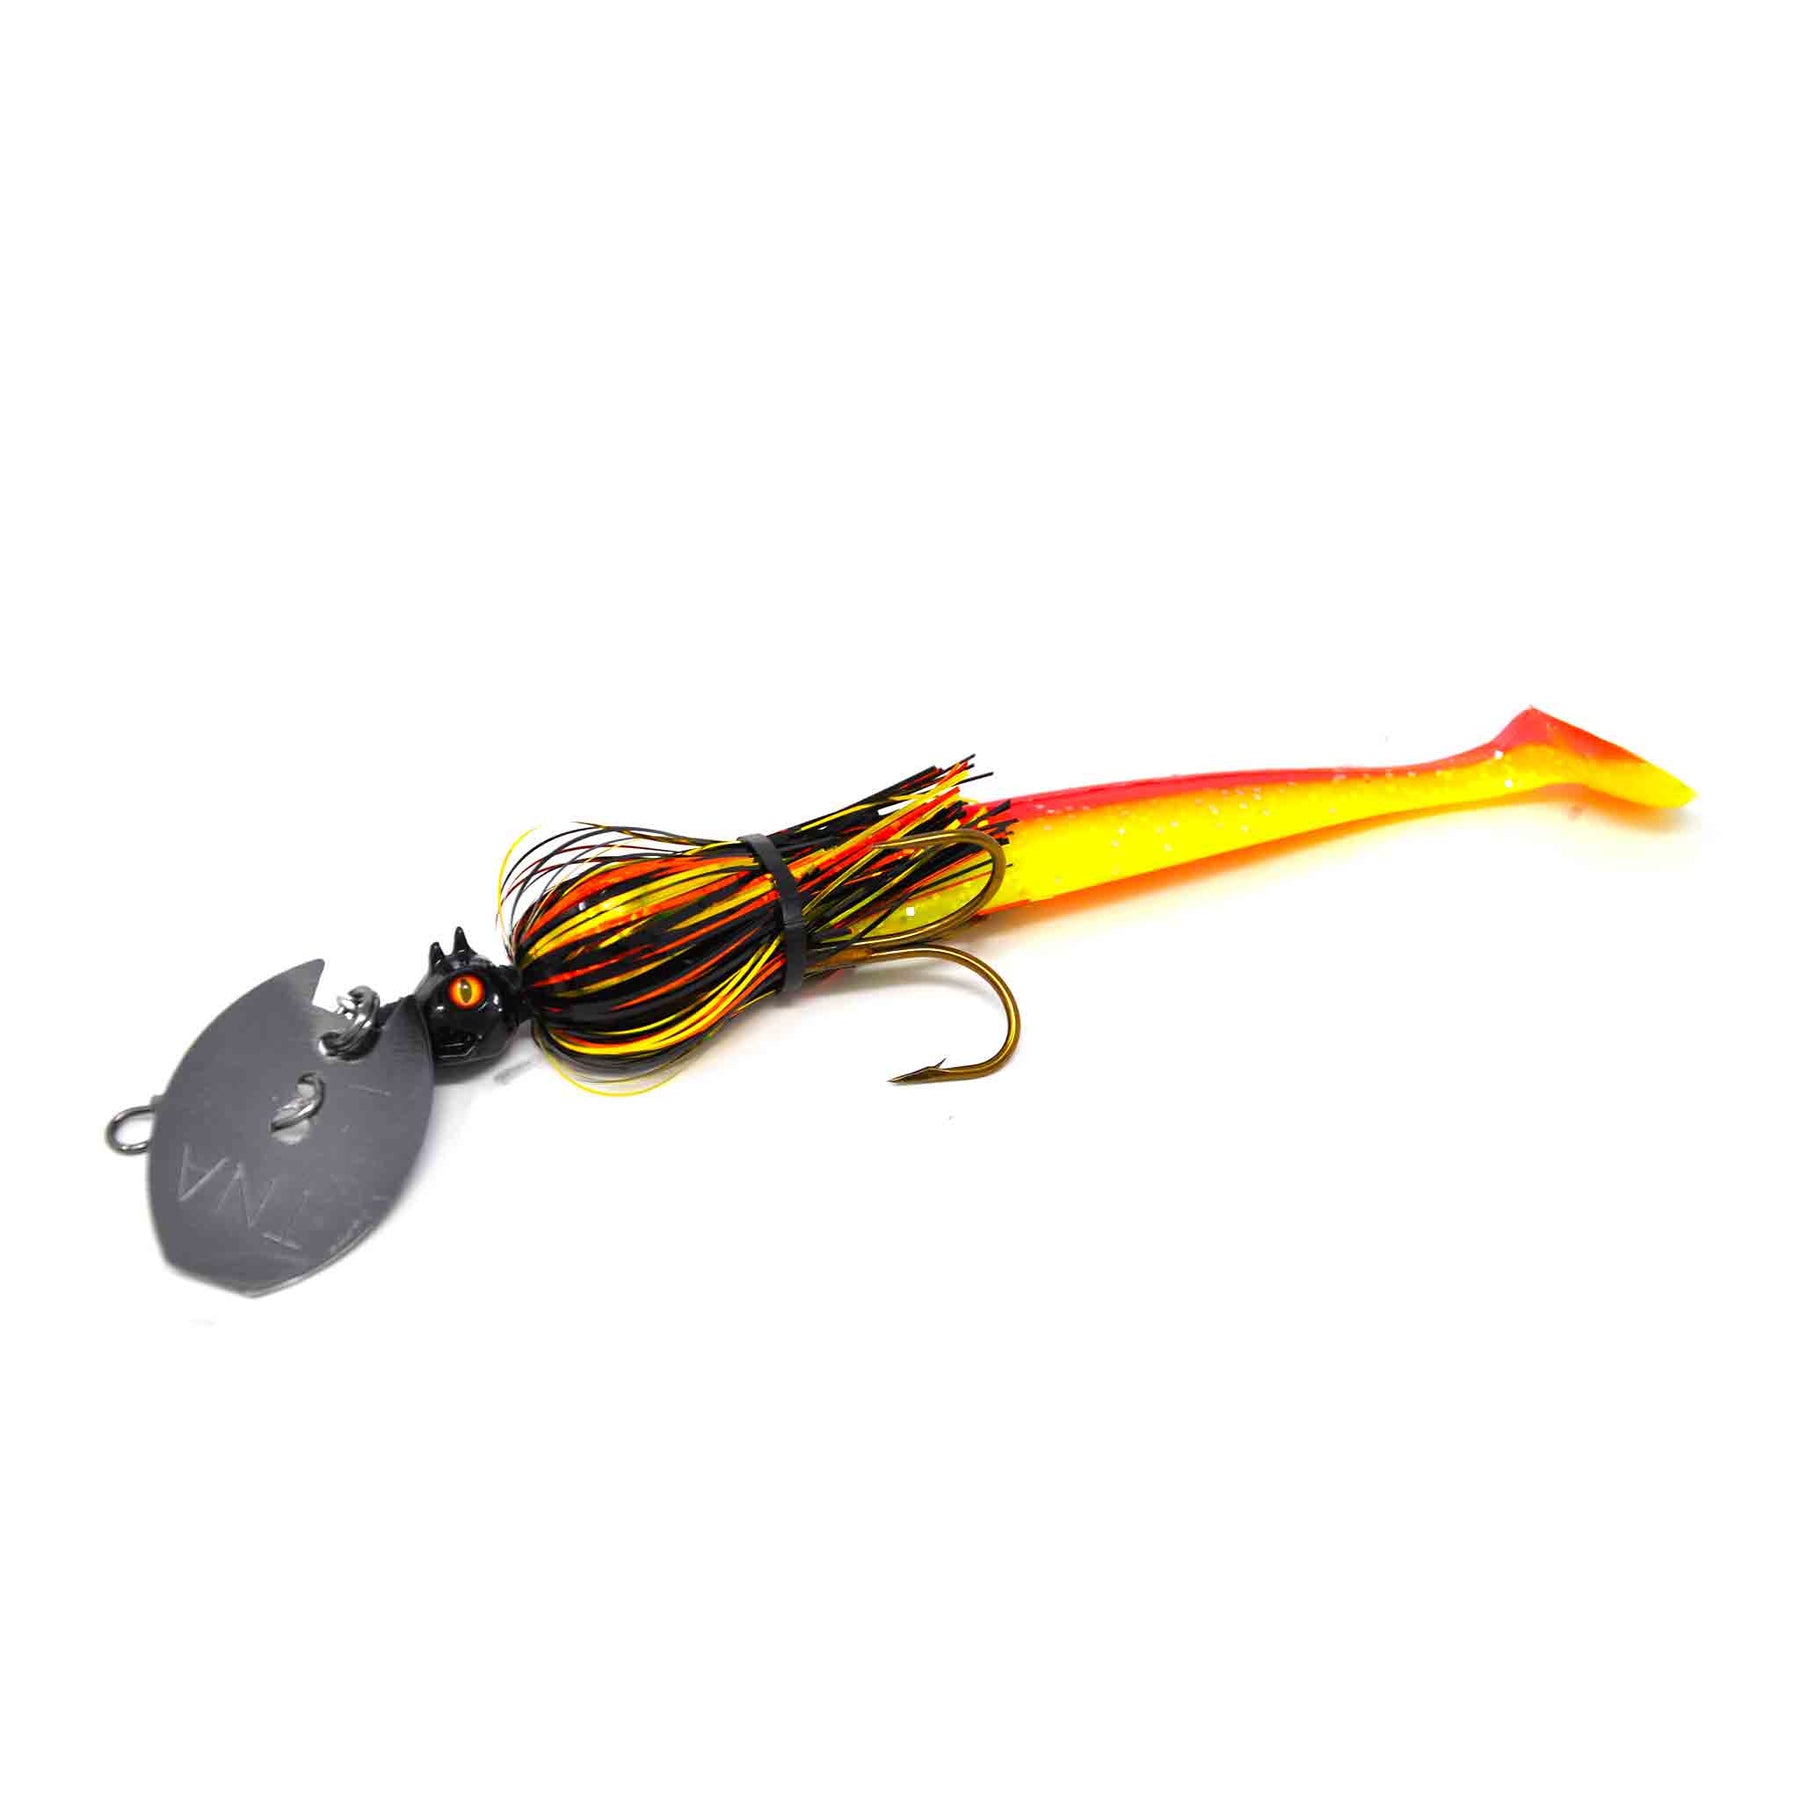 View of Chatterbaits TnA Tackle Micro Waggin Dragon Chatterbait Black Sunset available at EZOKO Pike and Musky Shop